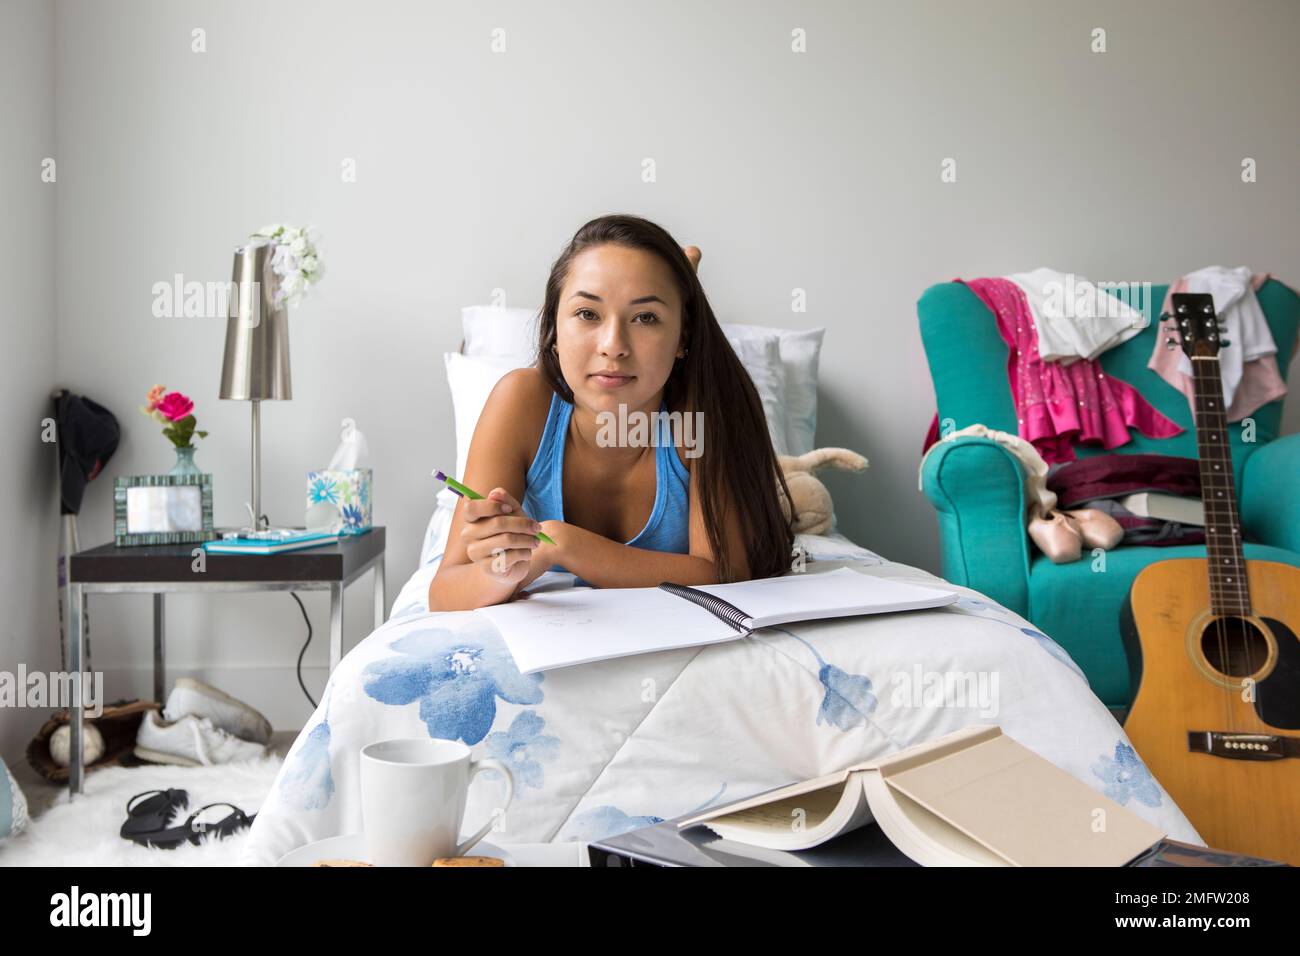 A teenage girl does homework on her bed in her bedroom. Stock Photo